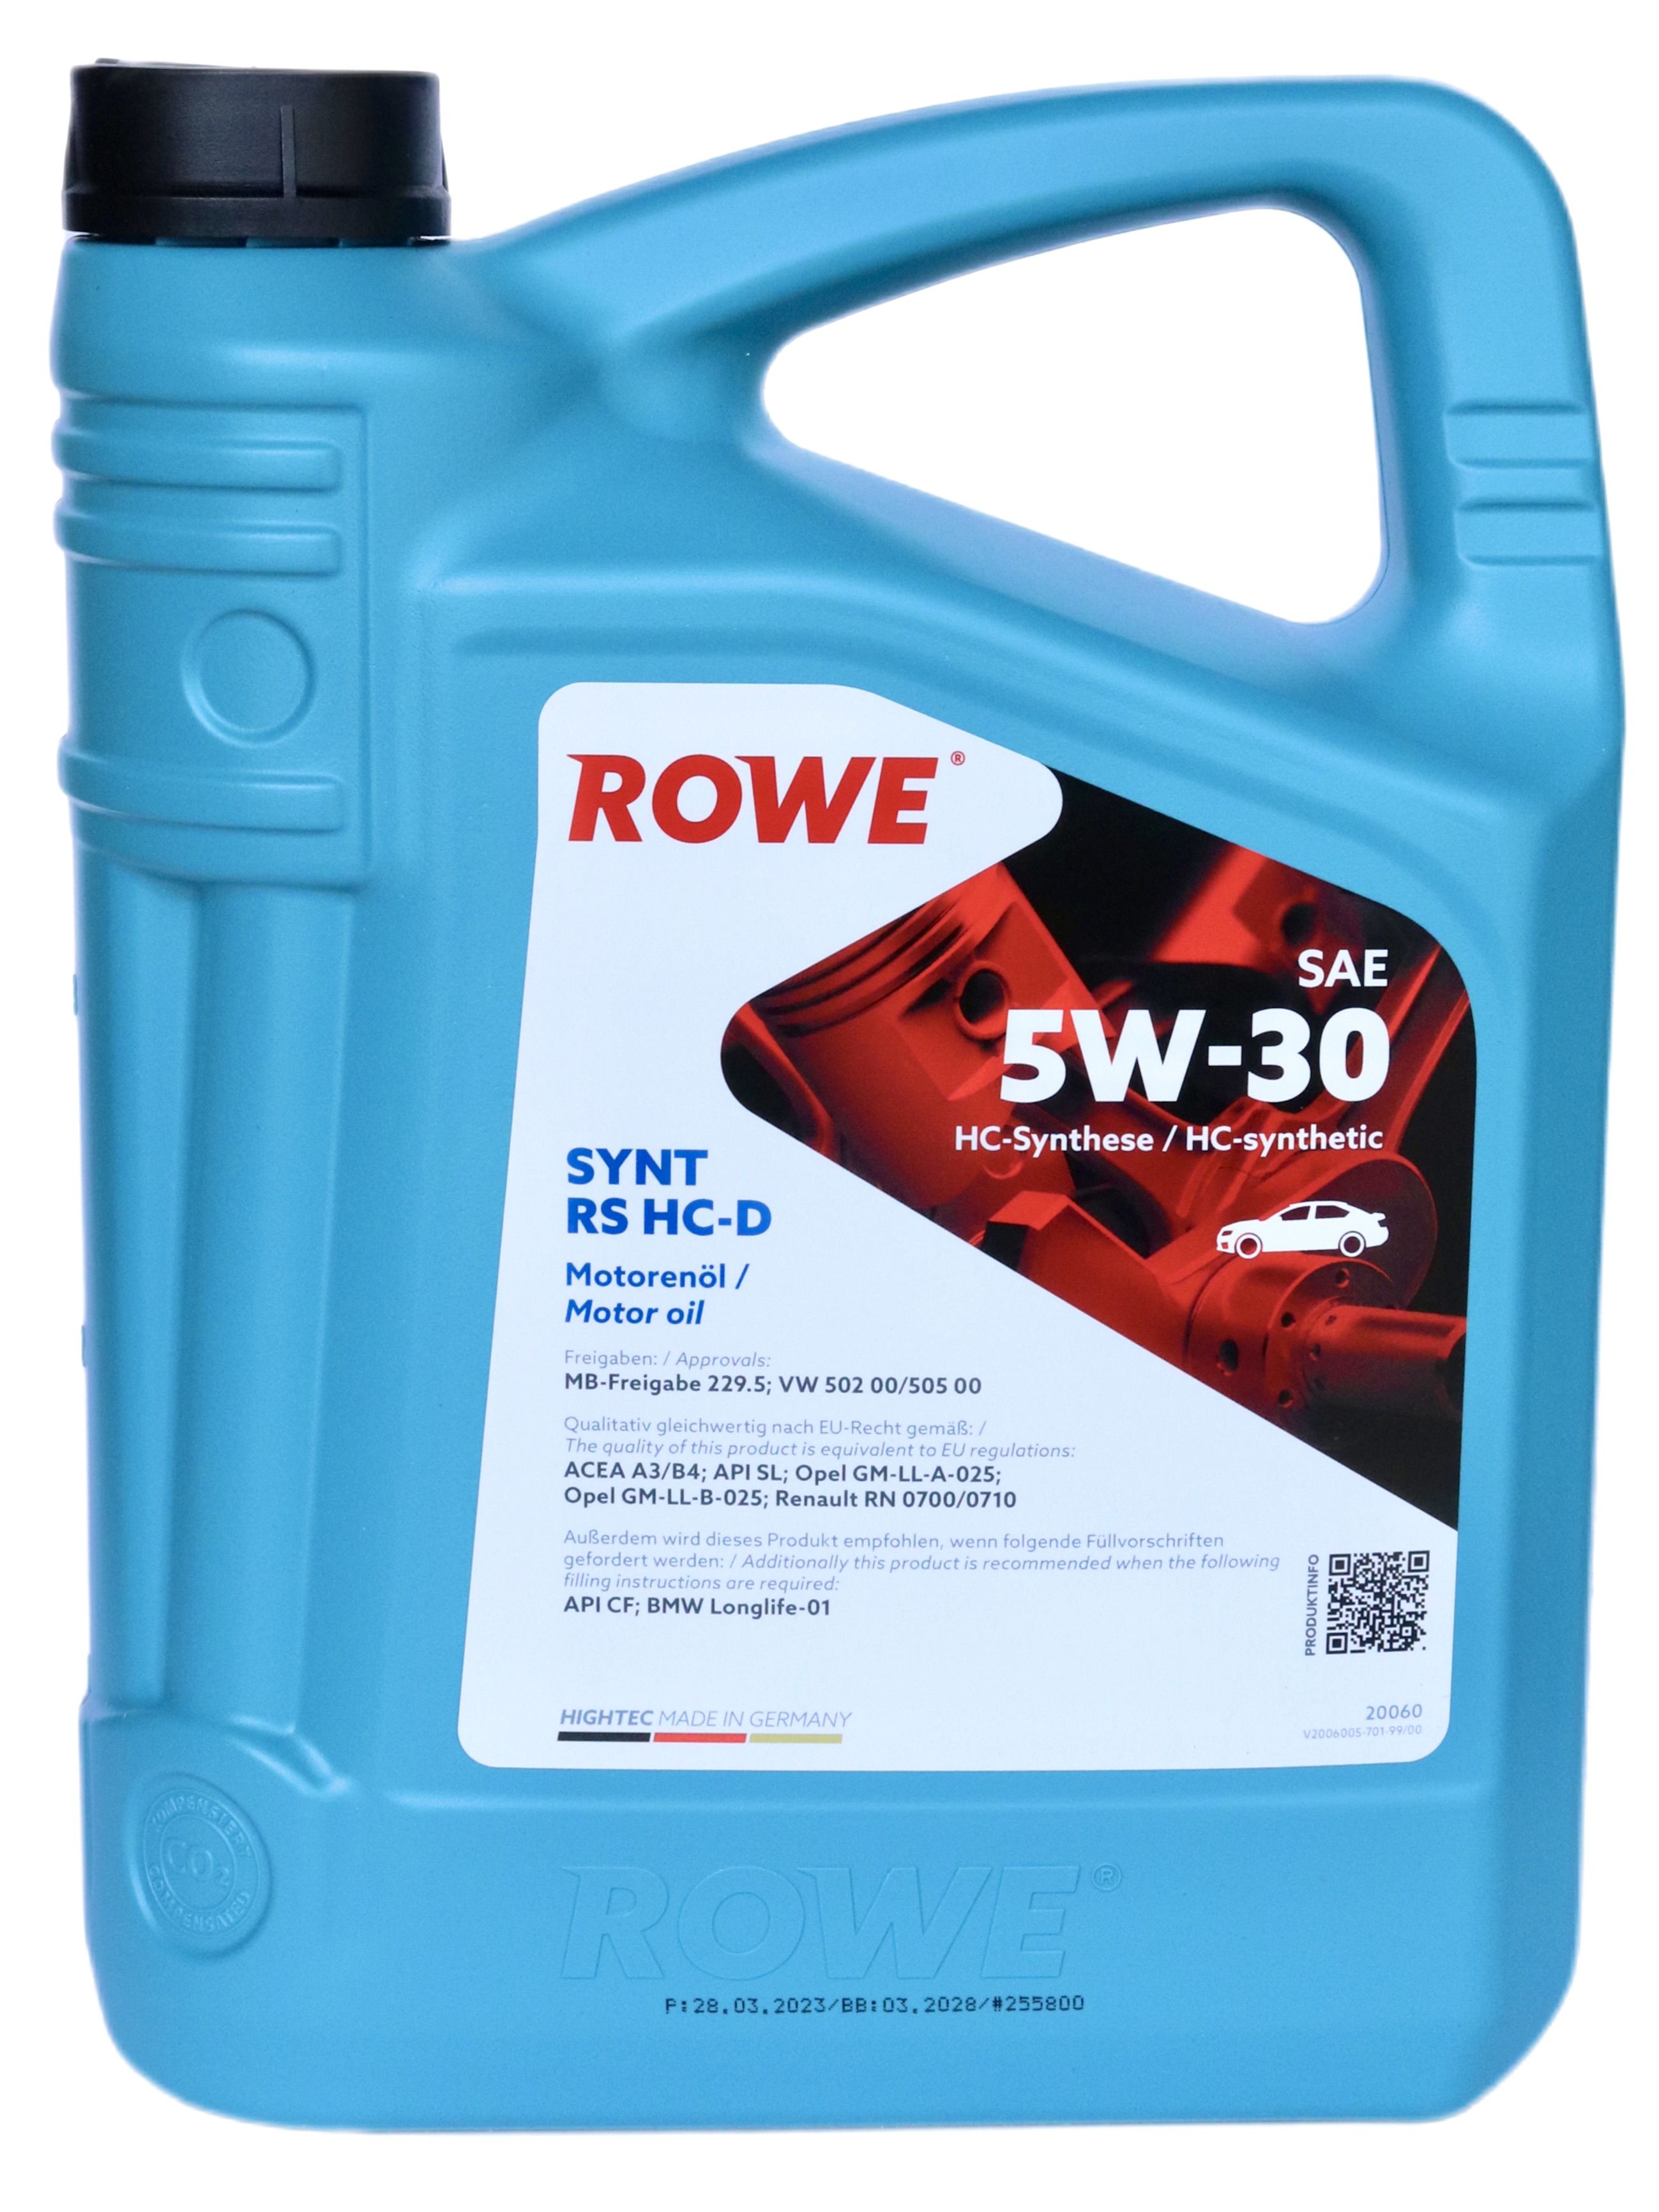 Моторное масло Rowe Hightec Multi Synt DPF SAE 5w-30. Rowe 5w30 RS DLS. Rowe DPF 5w-30 масло. Масло Rowe Hightec Synt RSI 5w40.